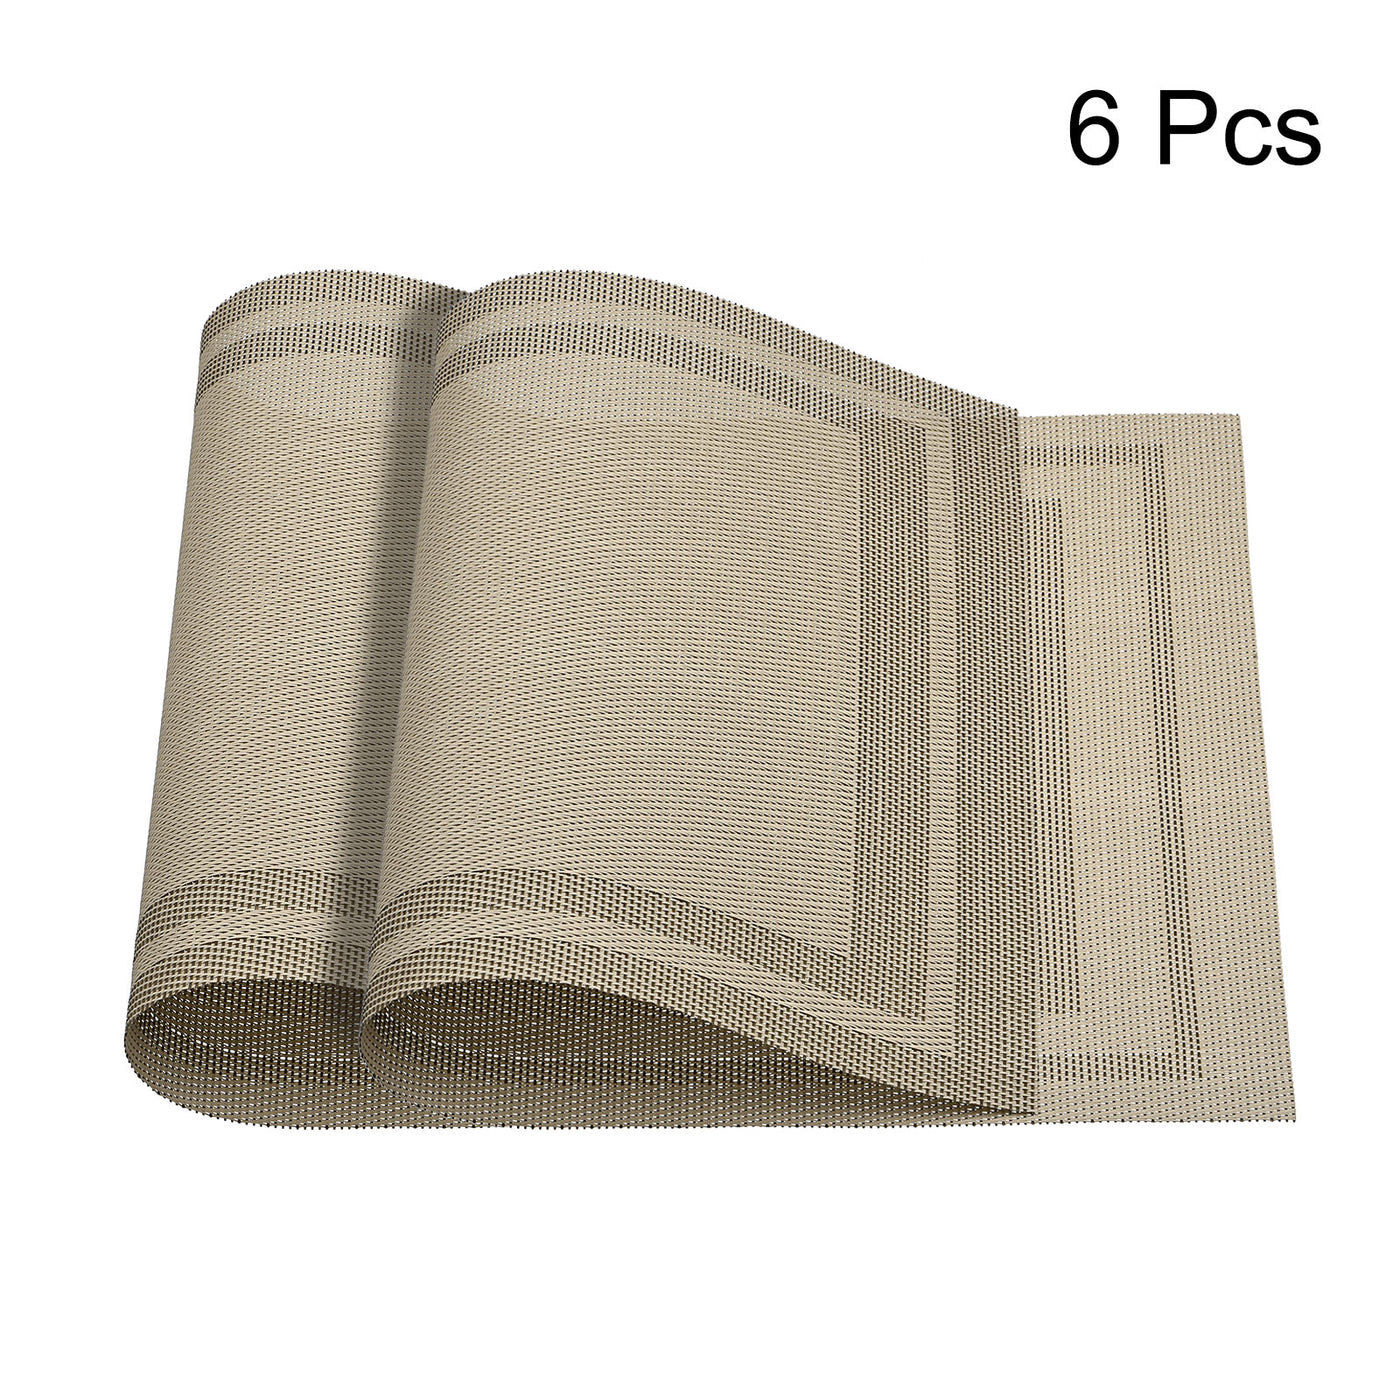 uxcell Uxcell Place Mats, 450x300mm Table Mats Set of 6 PVC Washable Woven Placemat Khaki